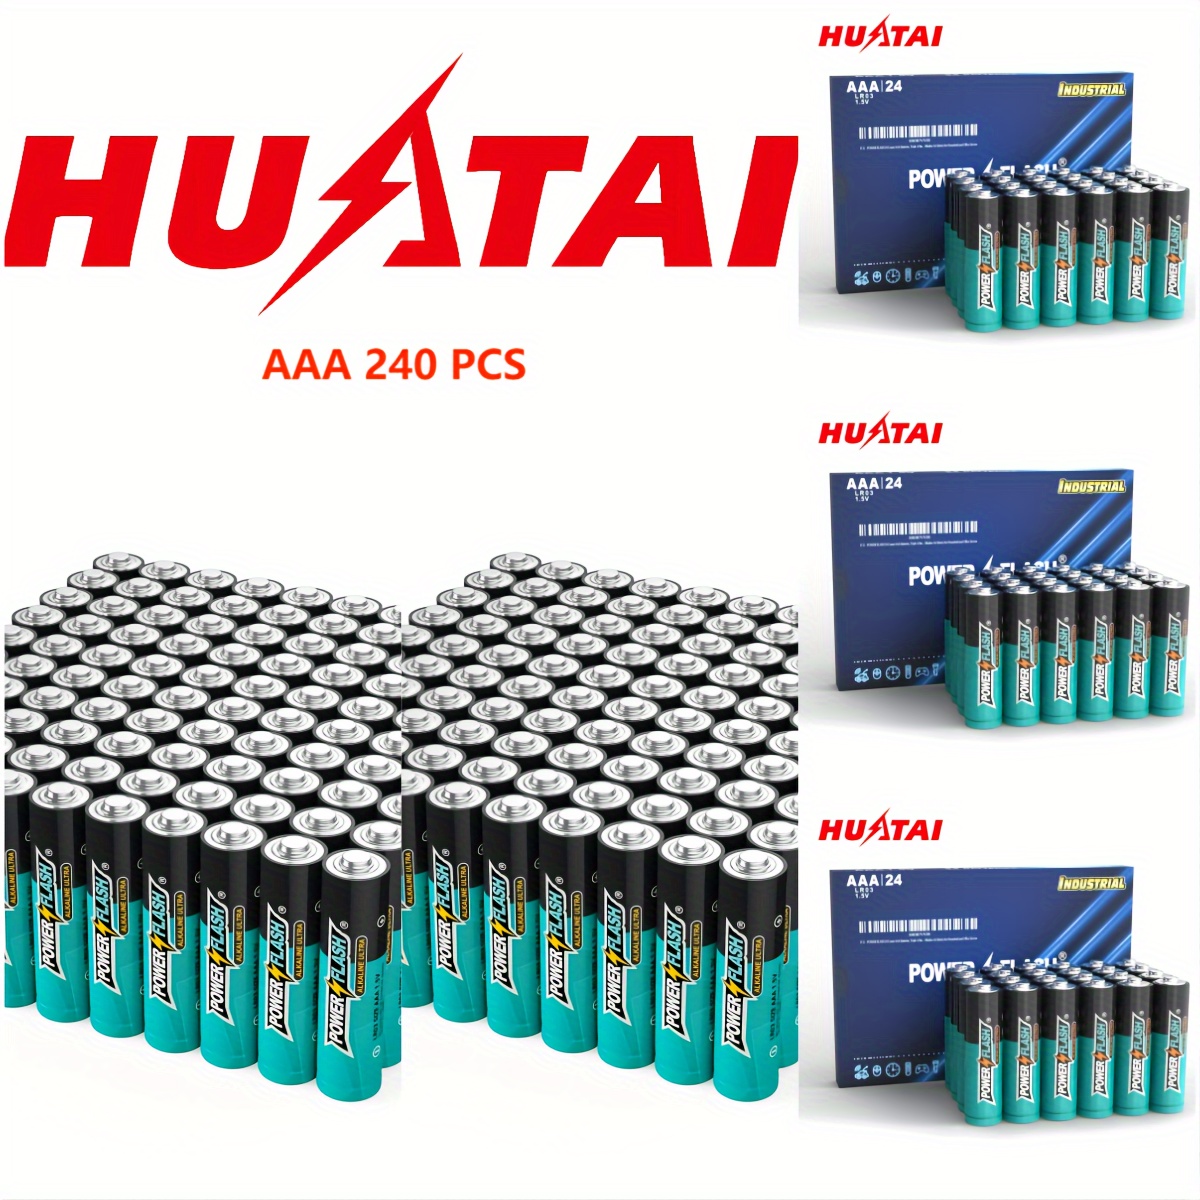 

Huatai Powerflash Aaa 240 Pcs High-performance Alkaline Batteries Value Pack, Lr03, Triple A Batteries For Home, Various Household Device, Romotes